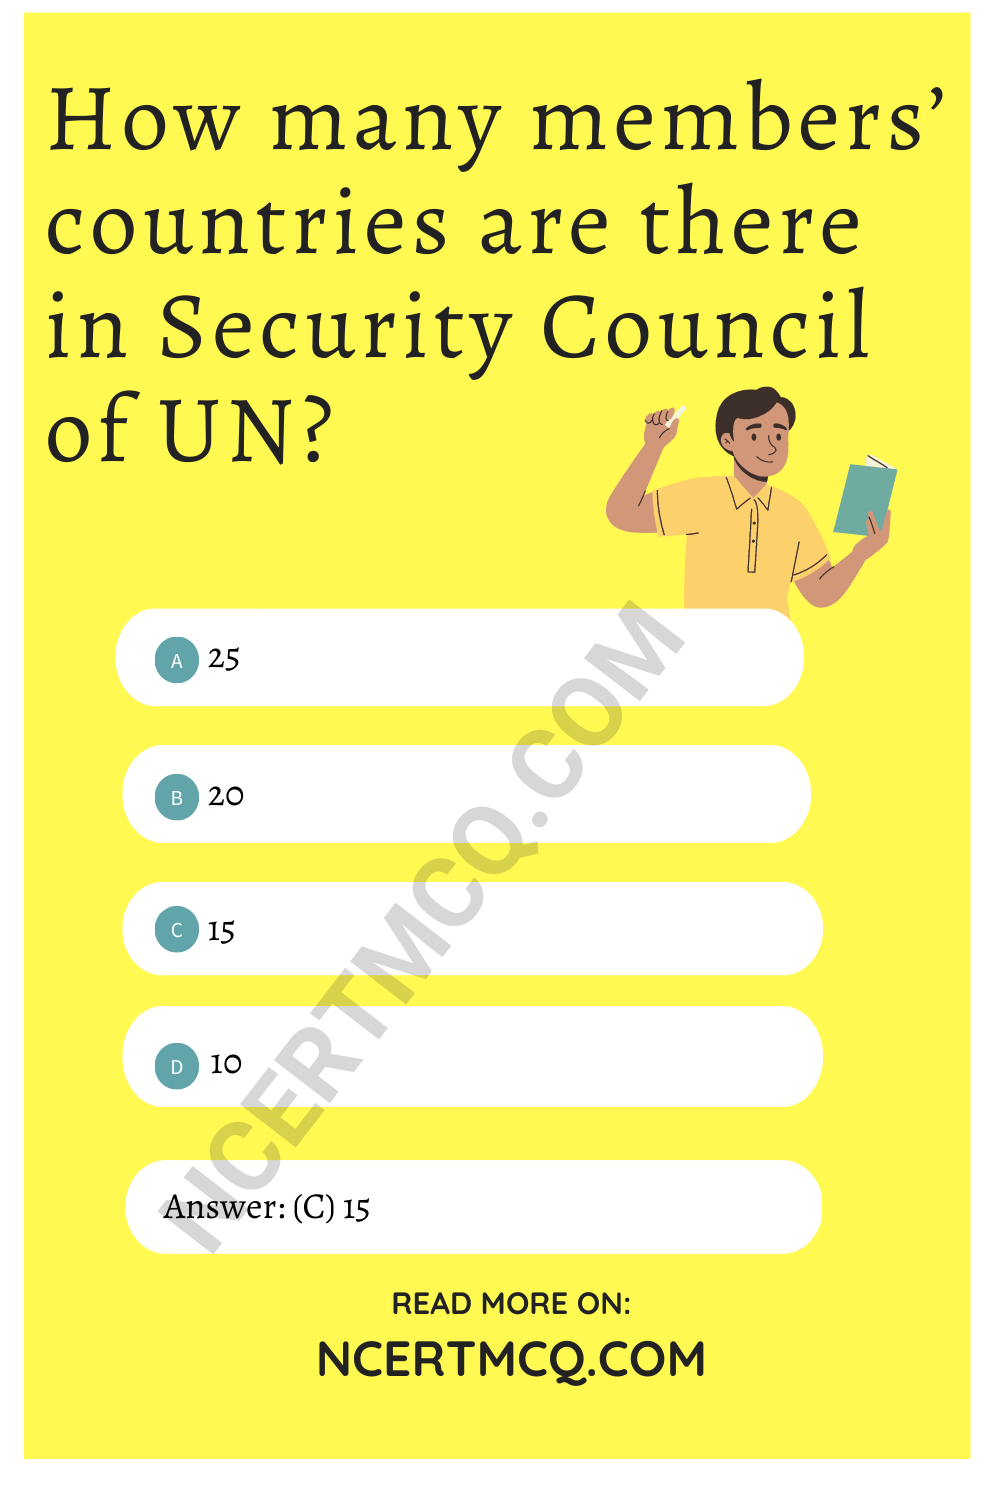 How many members’ countries are there in Security Council of UN?